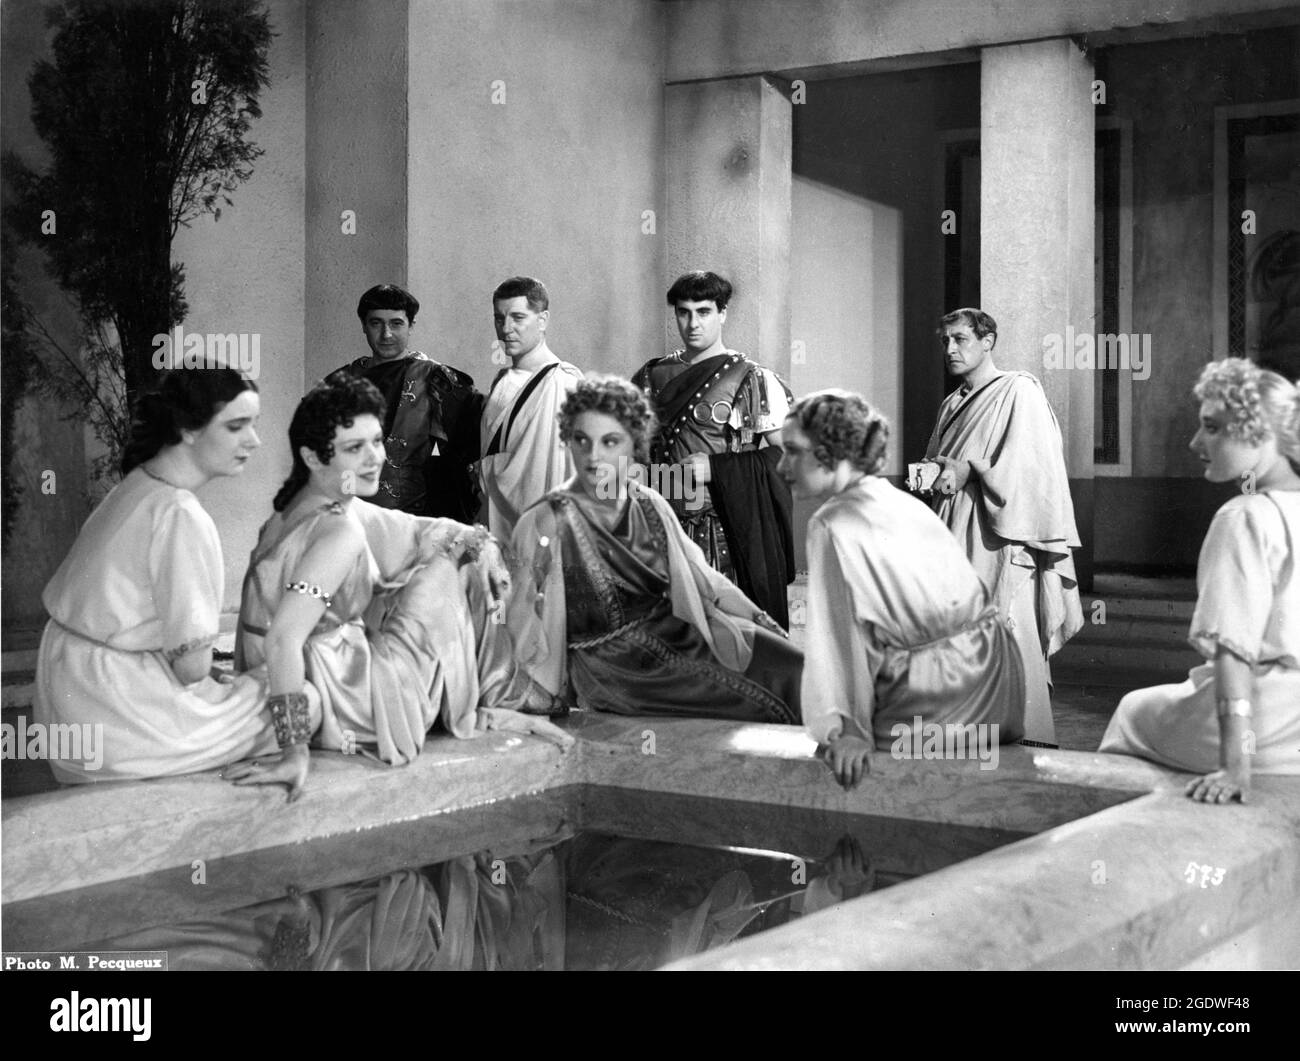 EDWIGE FEUILLERE (2nd left) and JEAN GABIN as Pontius Pilate in GOLGOTHA aka BEHOLD THE MAN (in US) 1935 director / writer JULIEN DUVIVIER music Jacques Ibert production design Jean Perrier costume design Jacques-Philippe Heuze  Ichtys Film Stock Photo